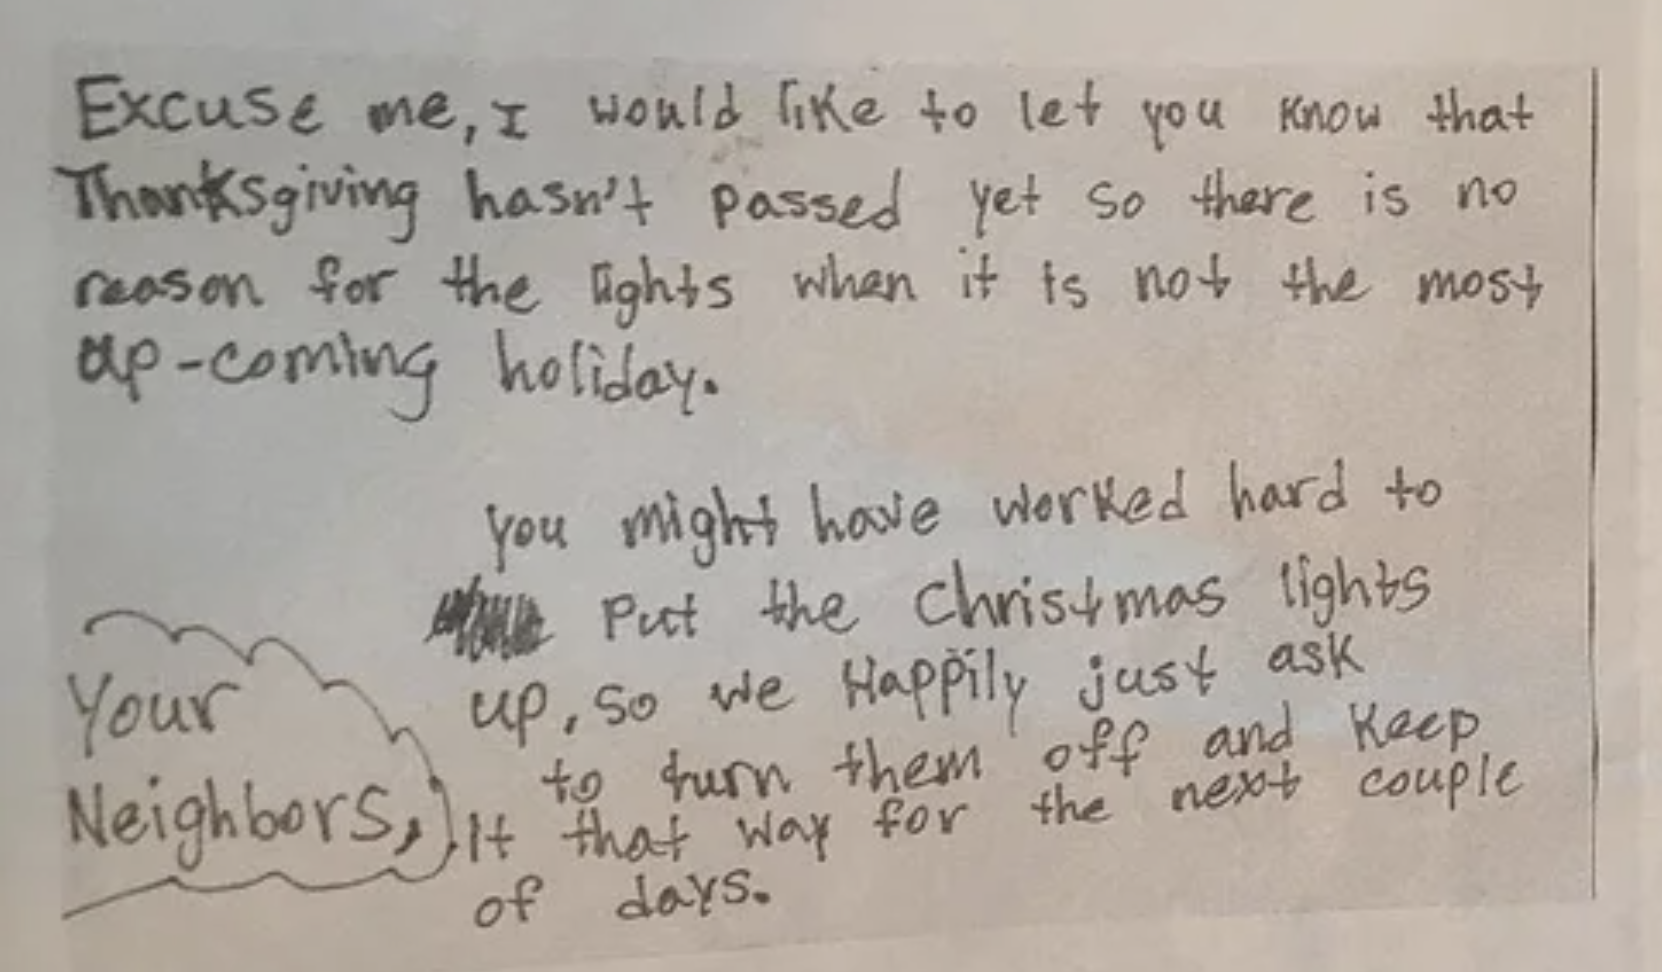 Letter that reads, &quot;You might have worked hard to put the Christmas lights up, so we happily just ask to turn them off and keep it that way for the next couple of days&quot;